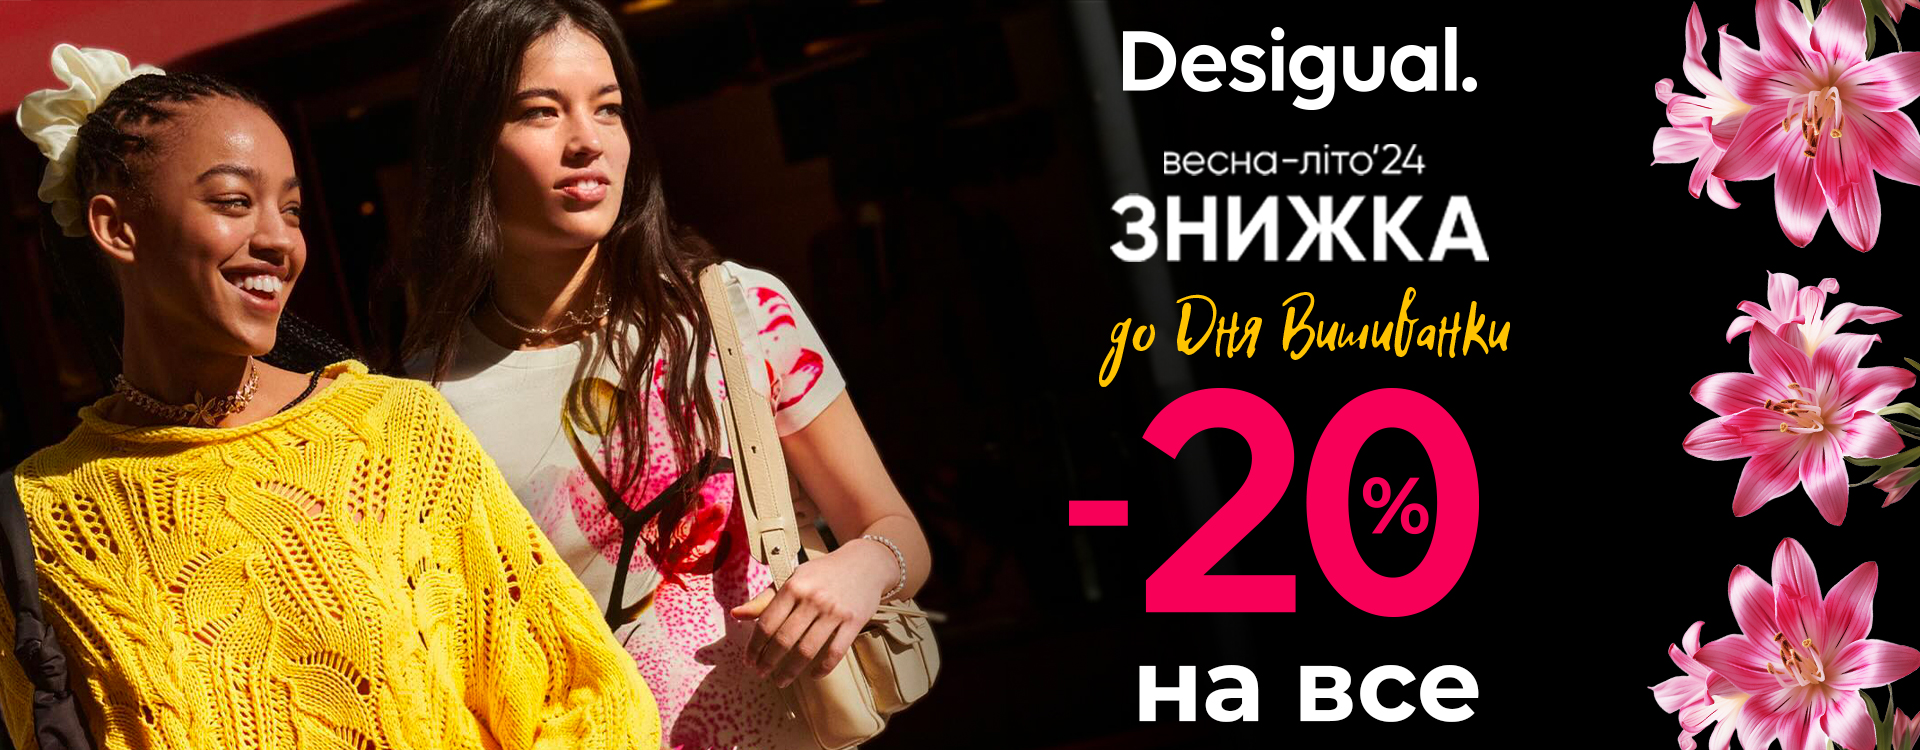 Celebrate Embroidery Day with Desigual